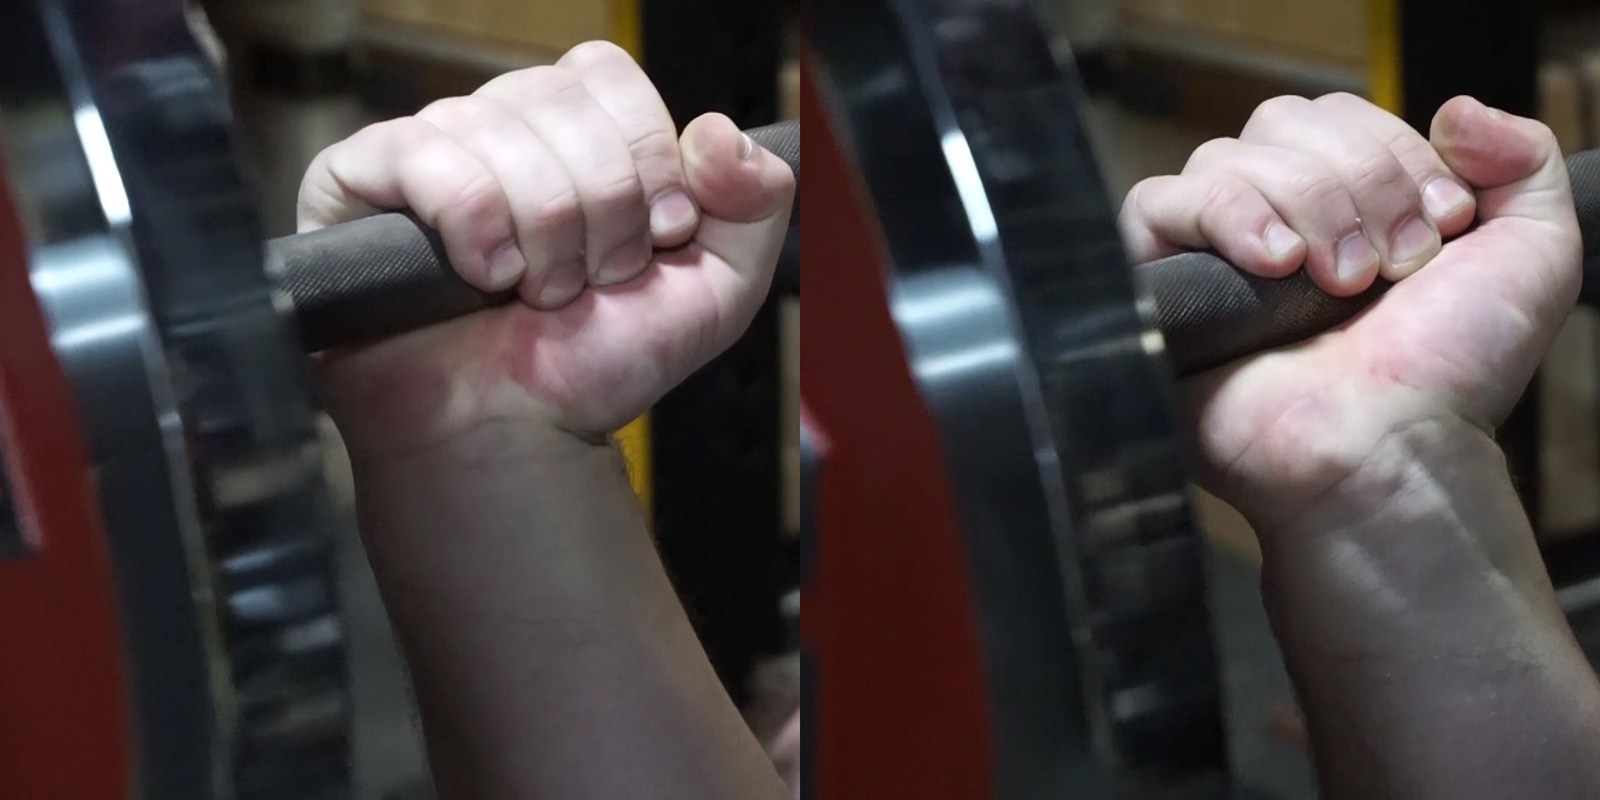 grip position can make a massive differences